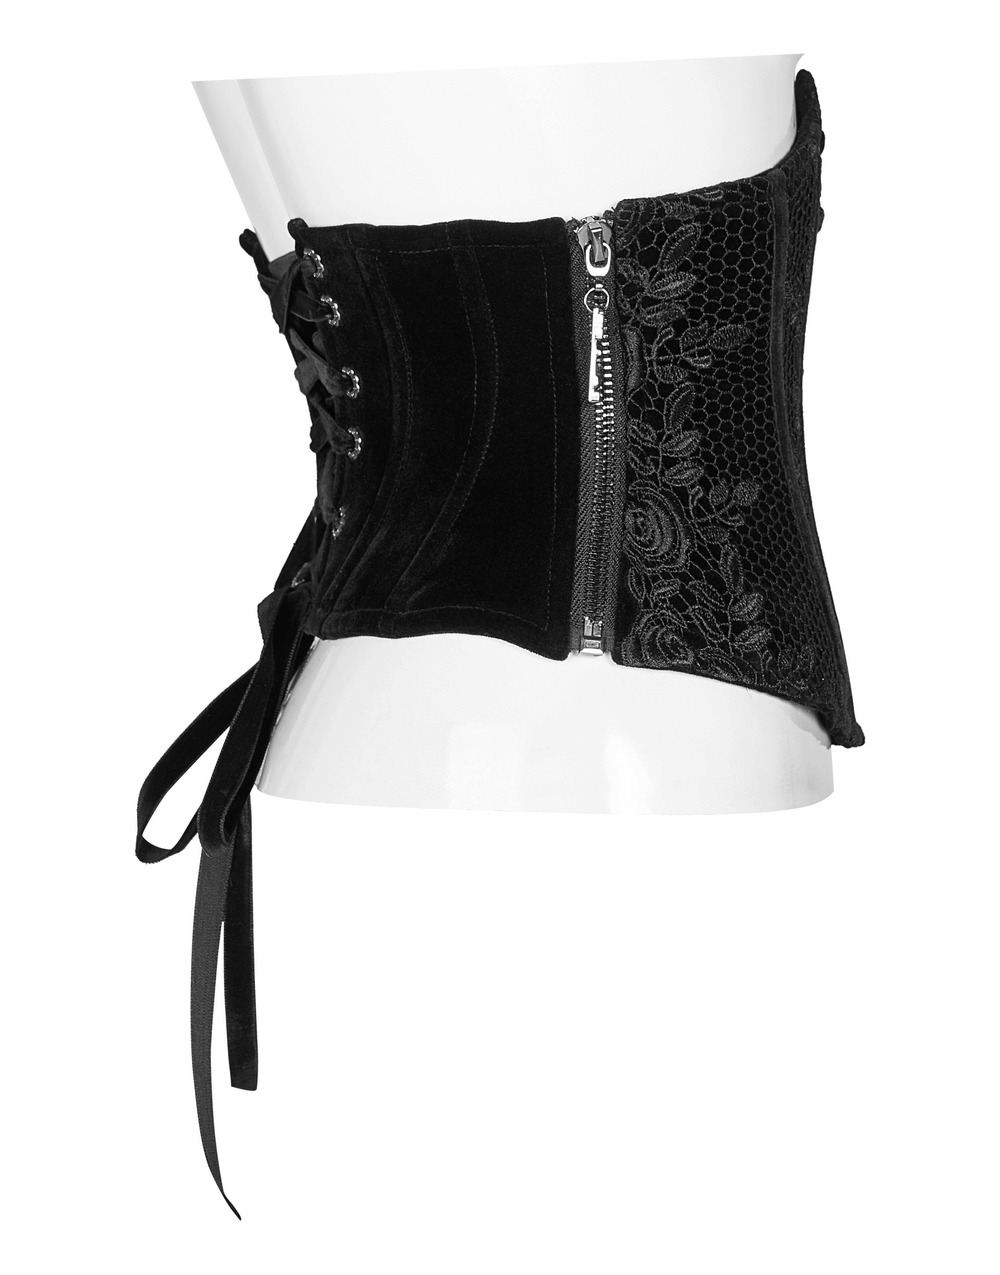 Vintage Velvet Cincher With Lace-Up Back And Zipper